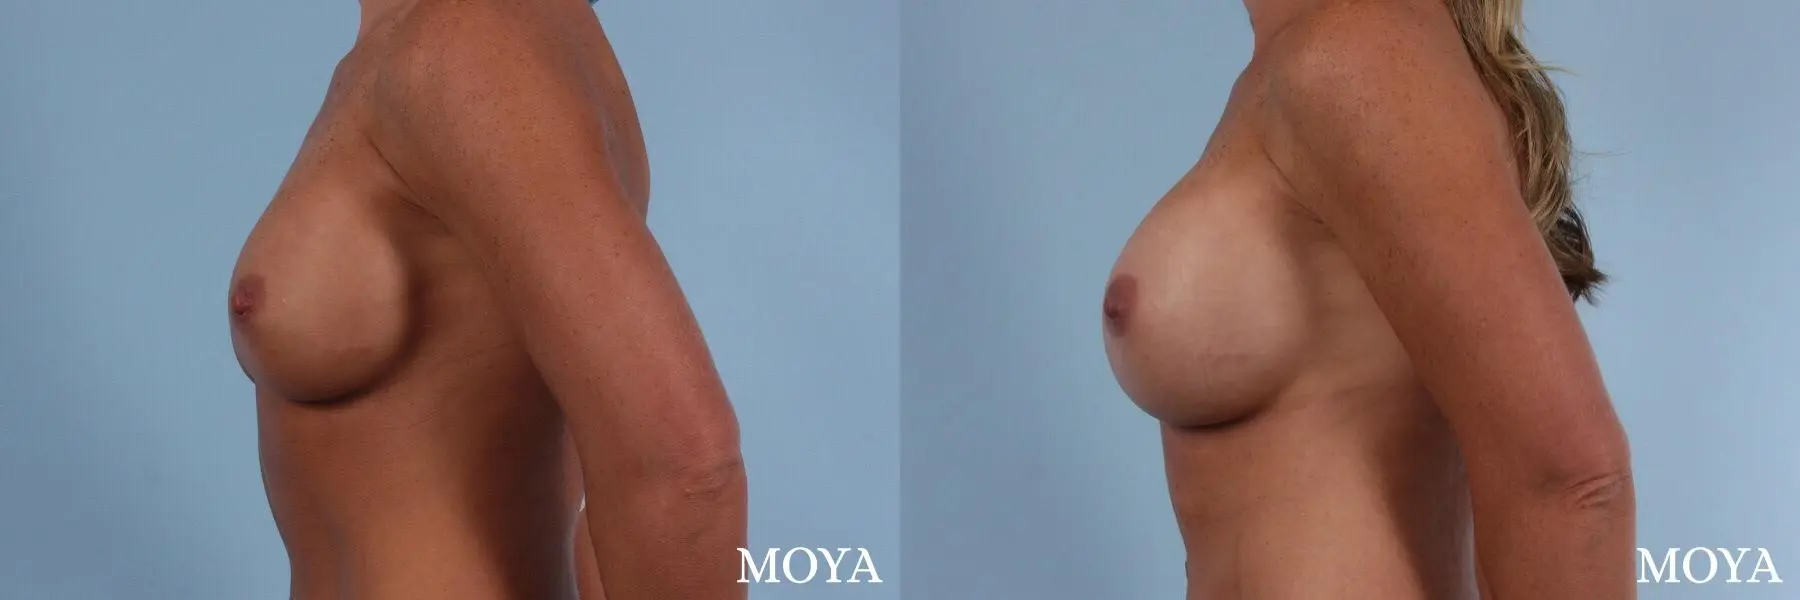 Breast Implant Exchange: Patient 3 - Before and After 2